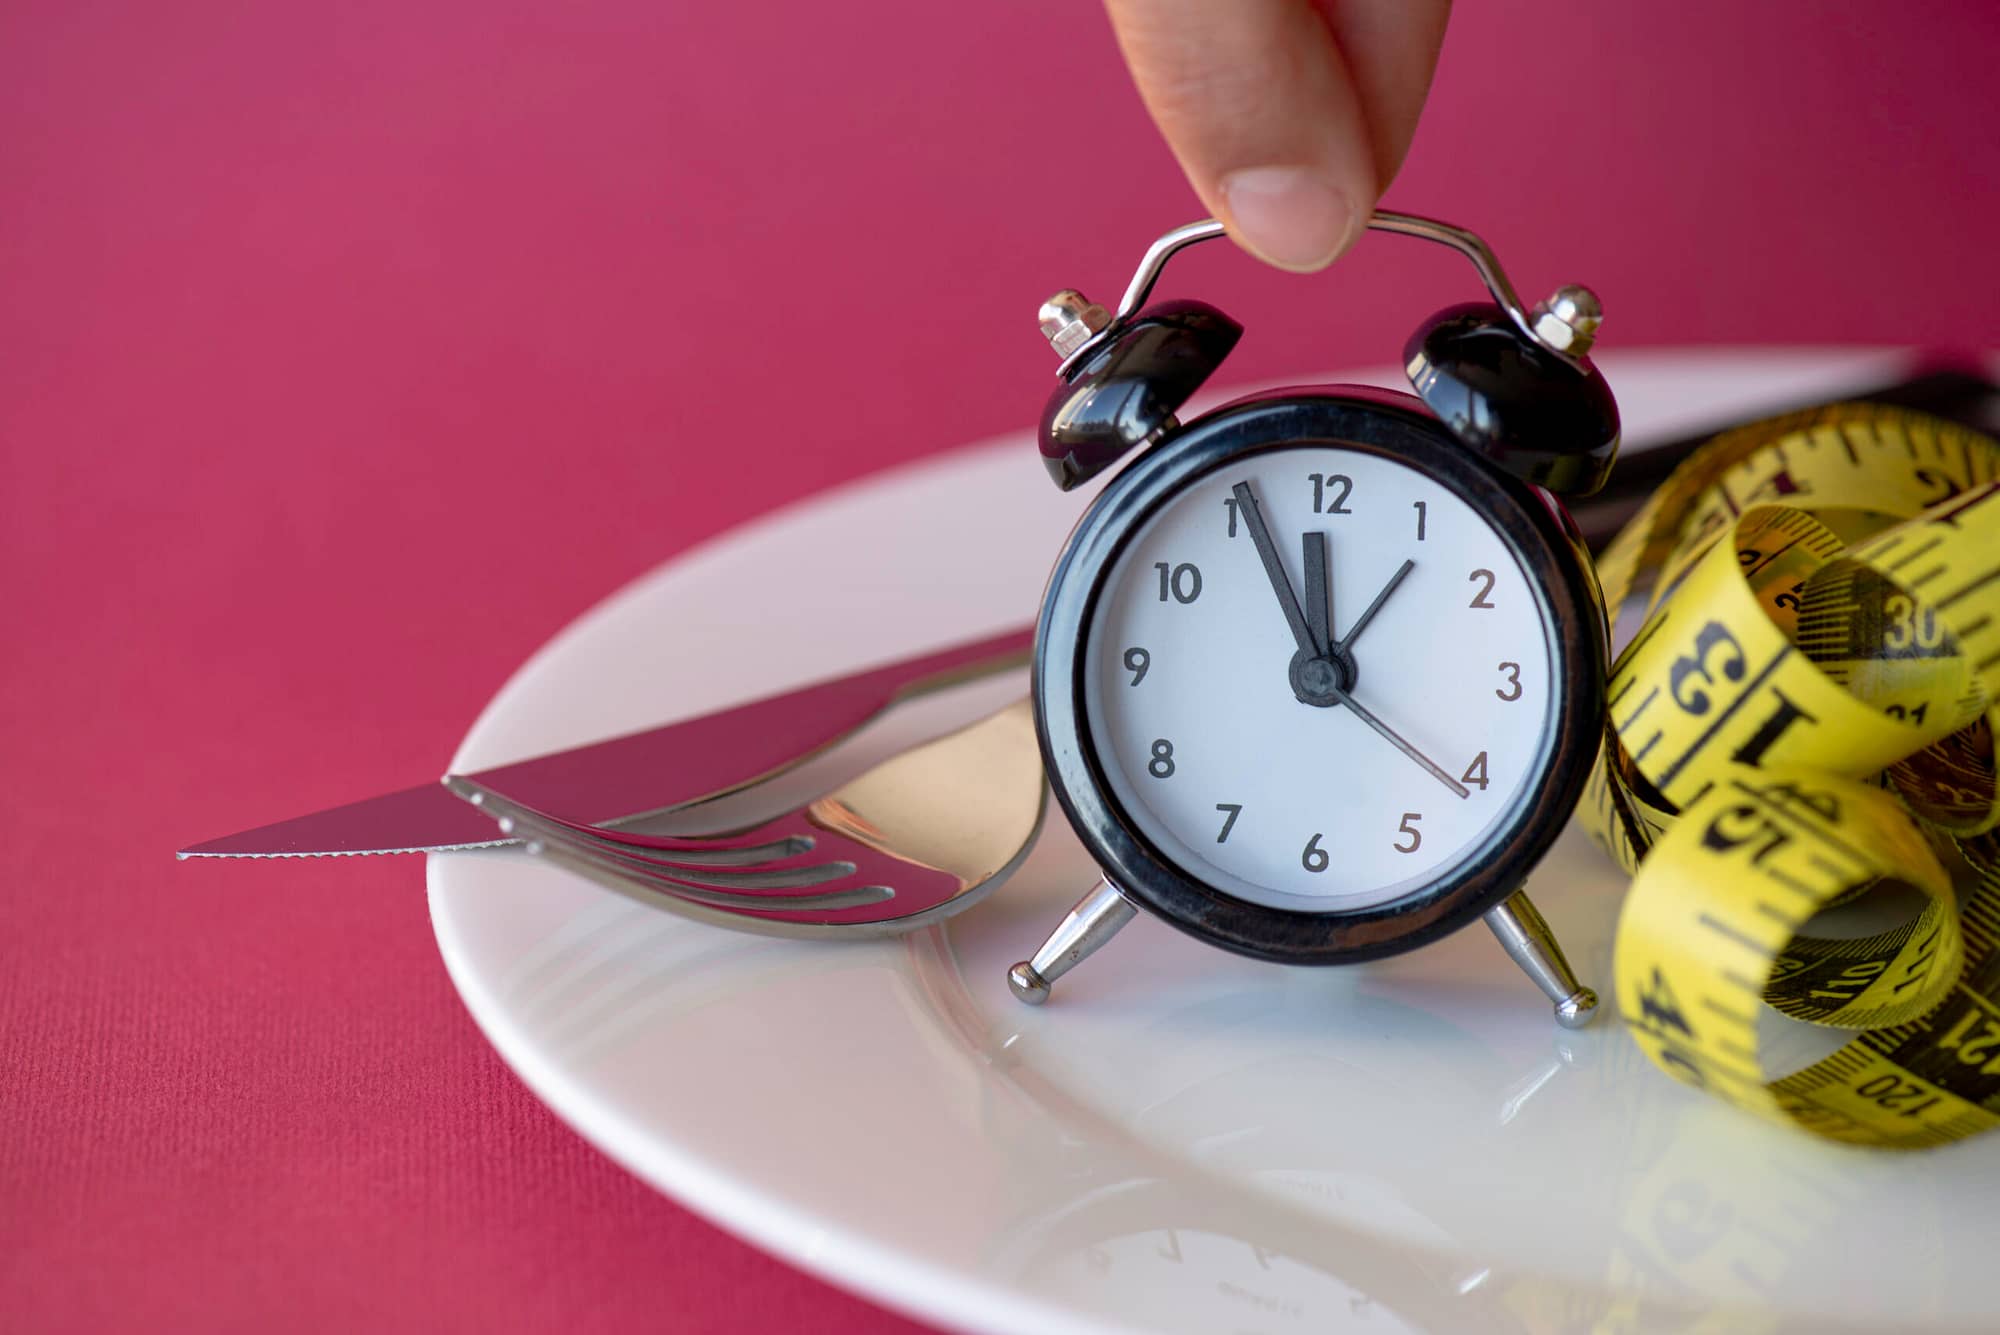 There are different methods of timing your intermittent fasting.